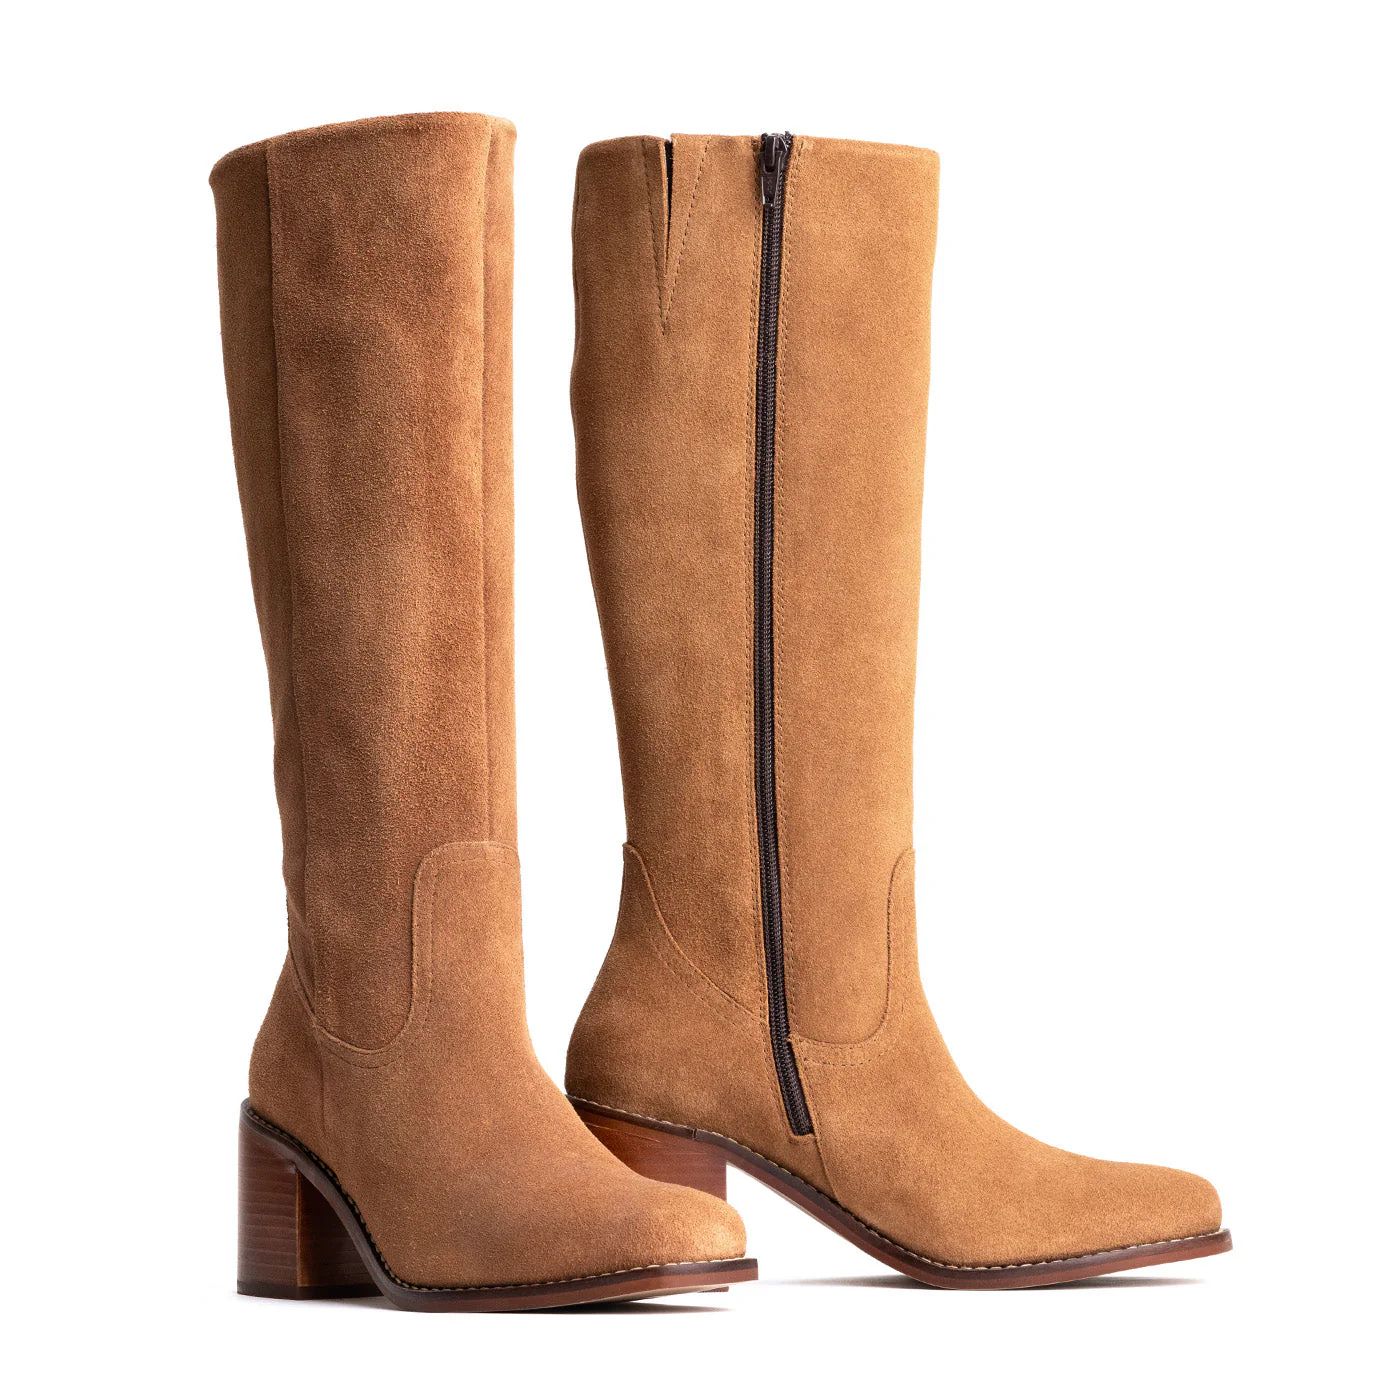 'Almost Perfect' Oslo Knee High Boot | Portland Leather Goods (US)